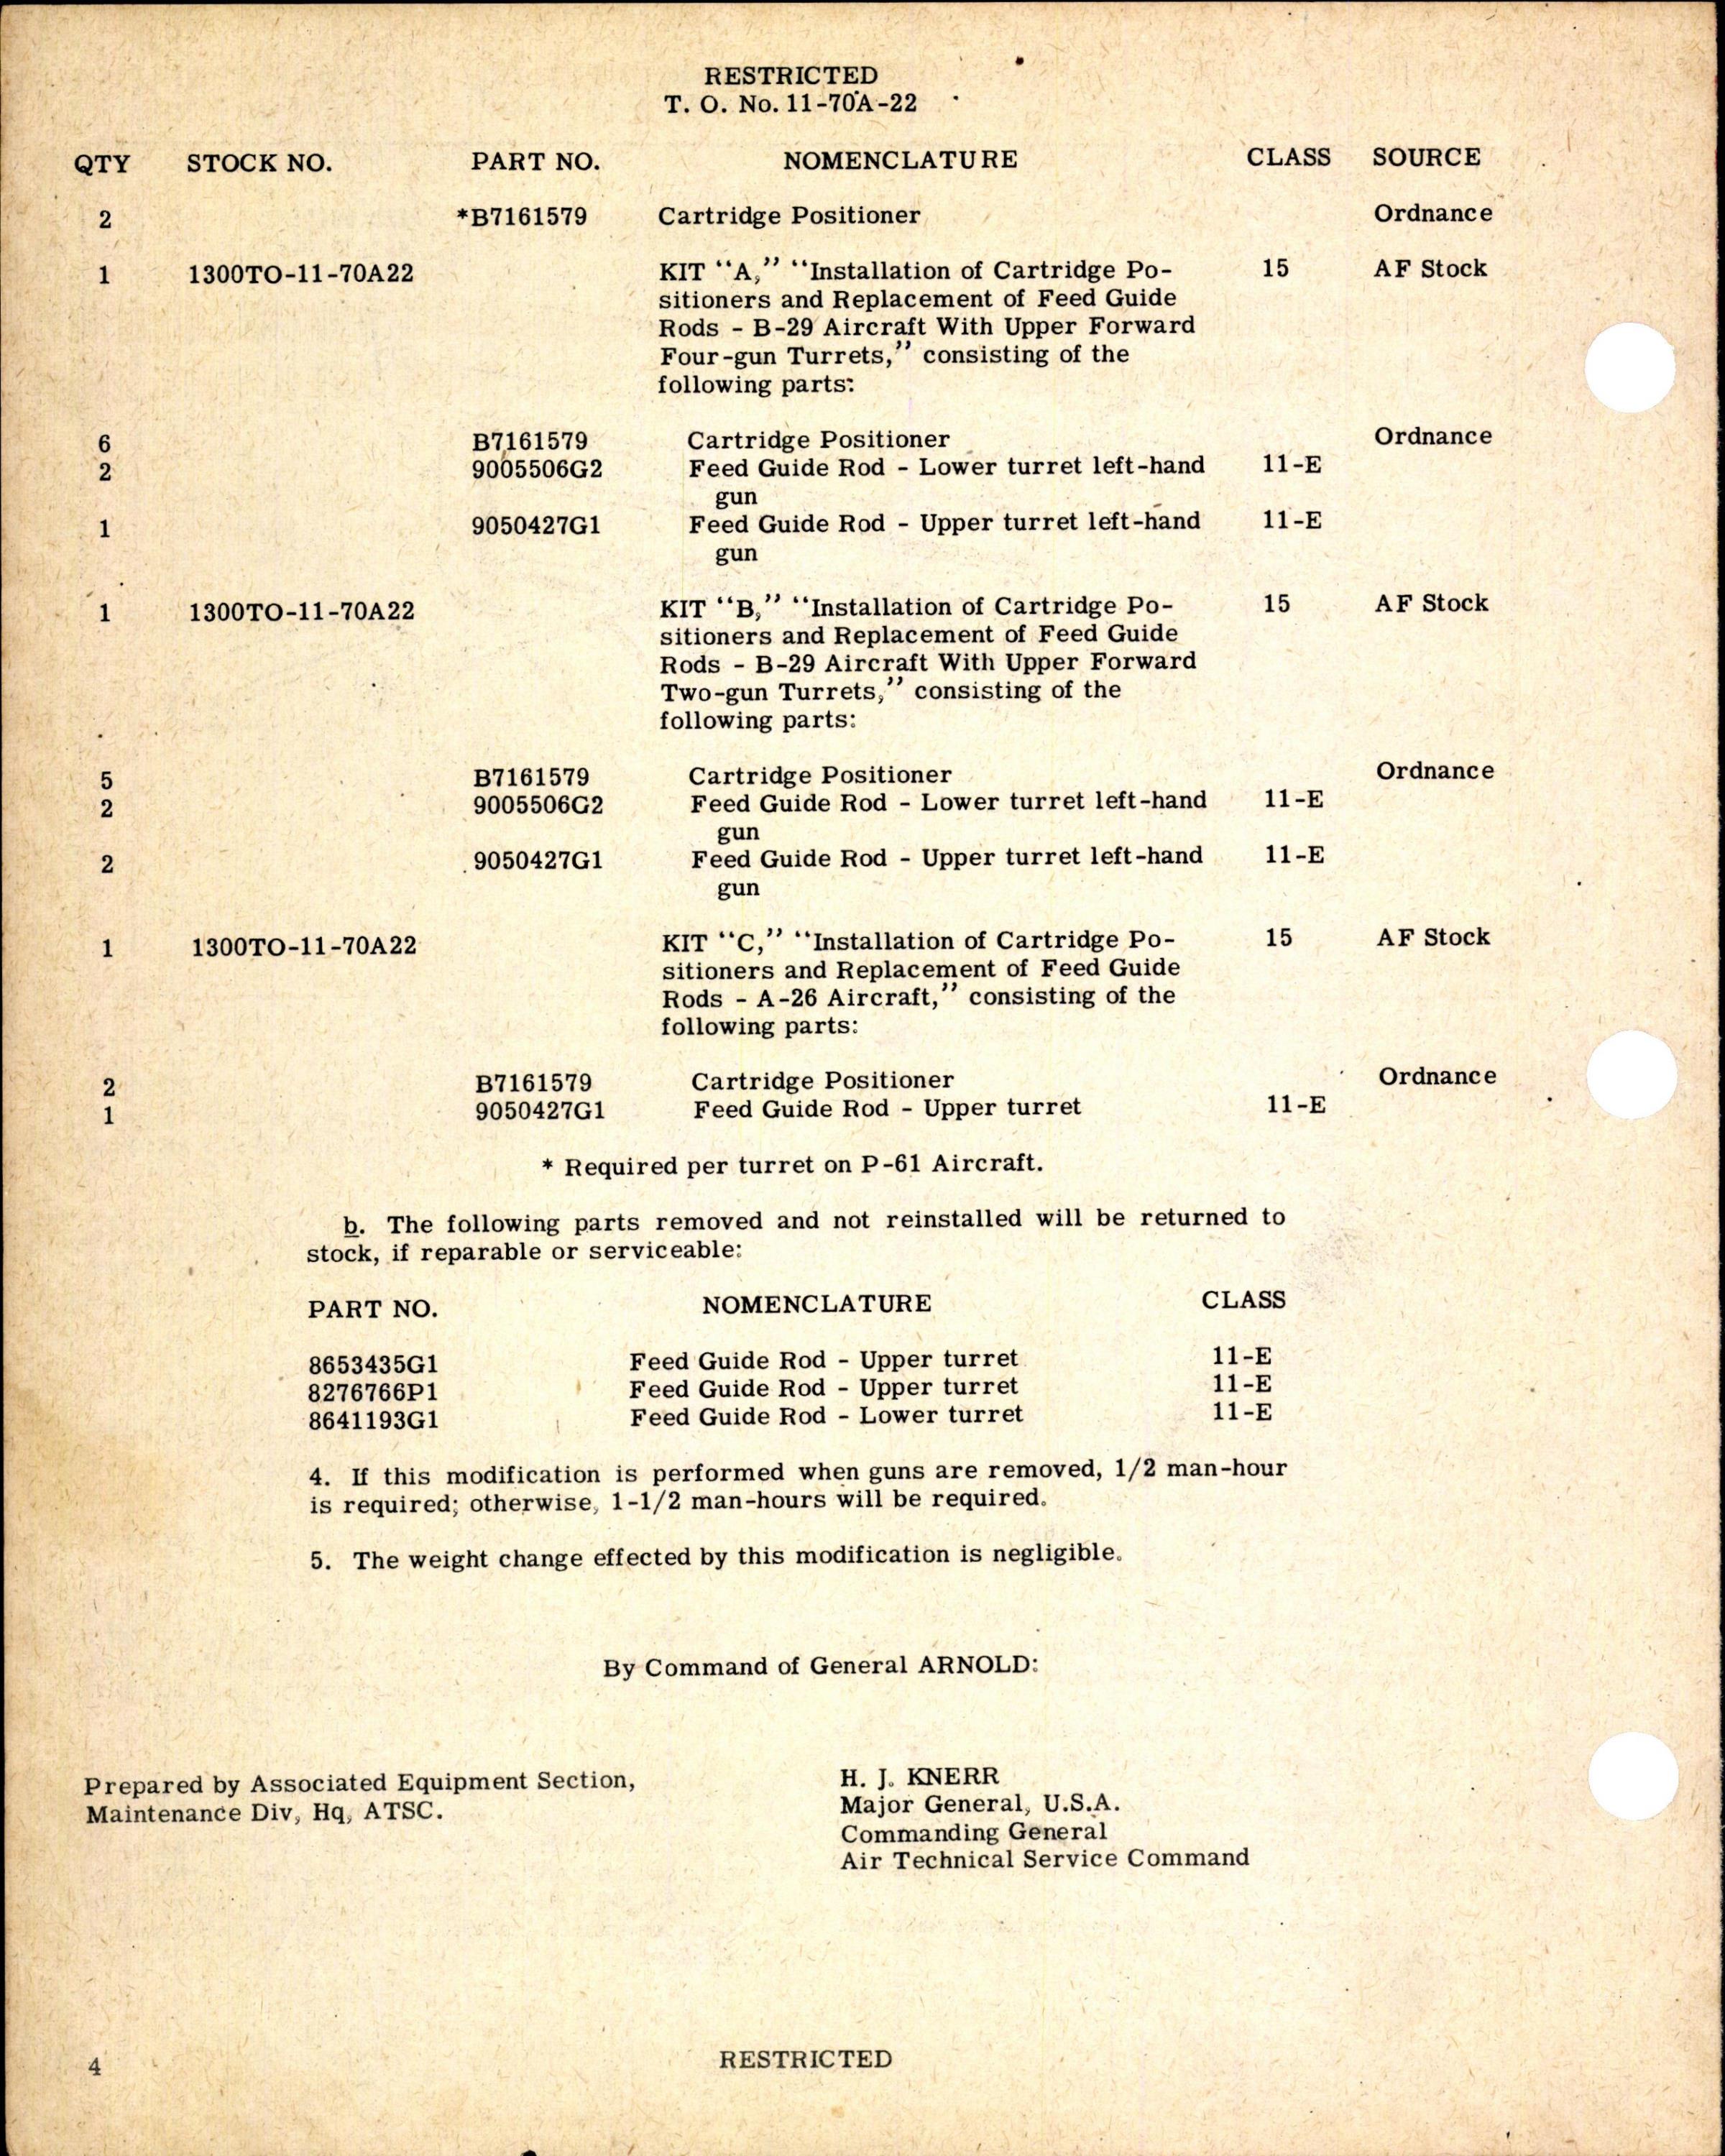 Sample page 4 from AirCorps Library document: Installation of Cartridge Positioners, Replacement of Feed Guide Rods